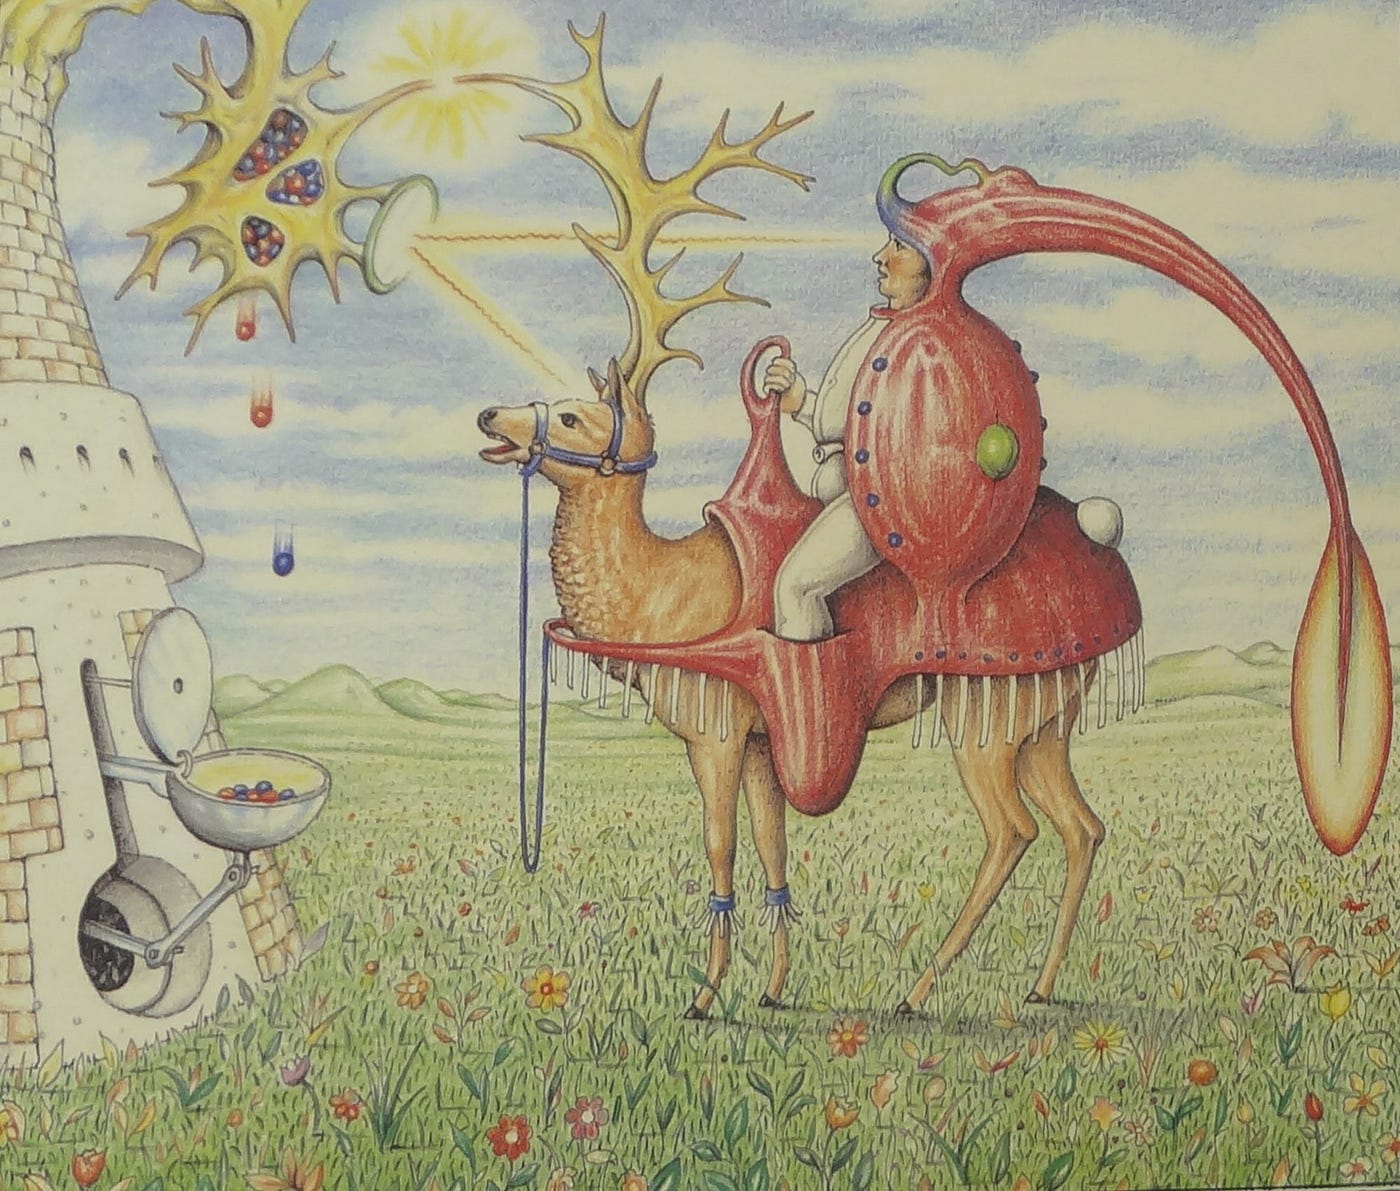 Codex Seraphinianus” and “Book of Miracles”, by Levente